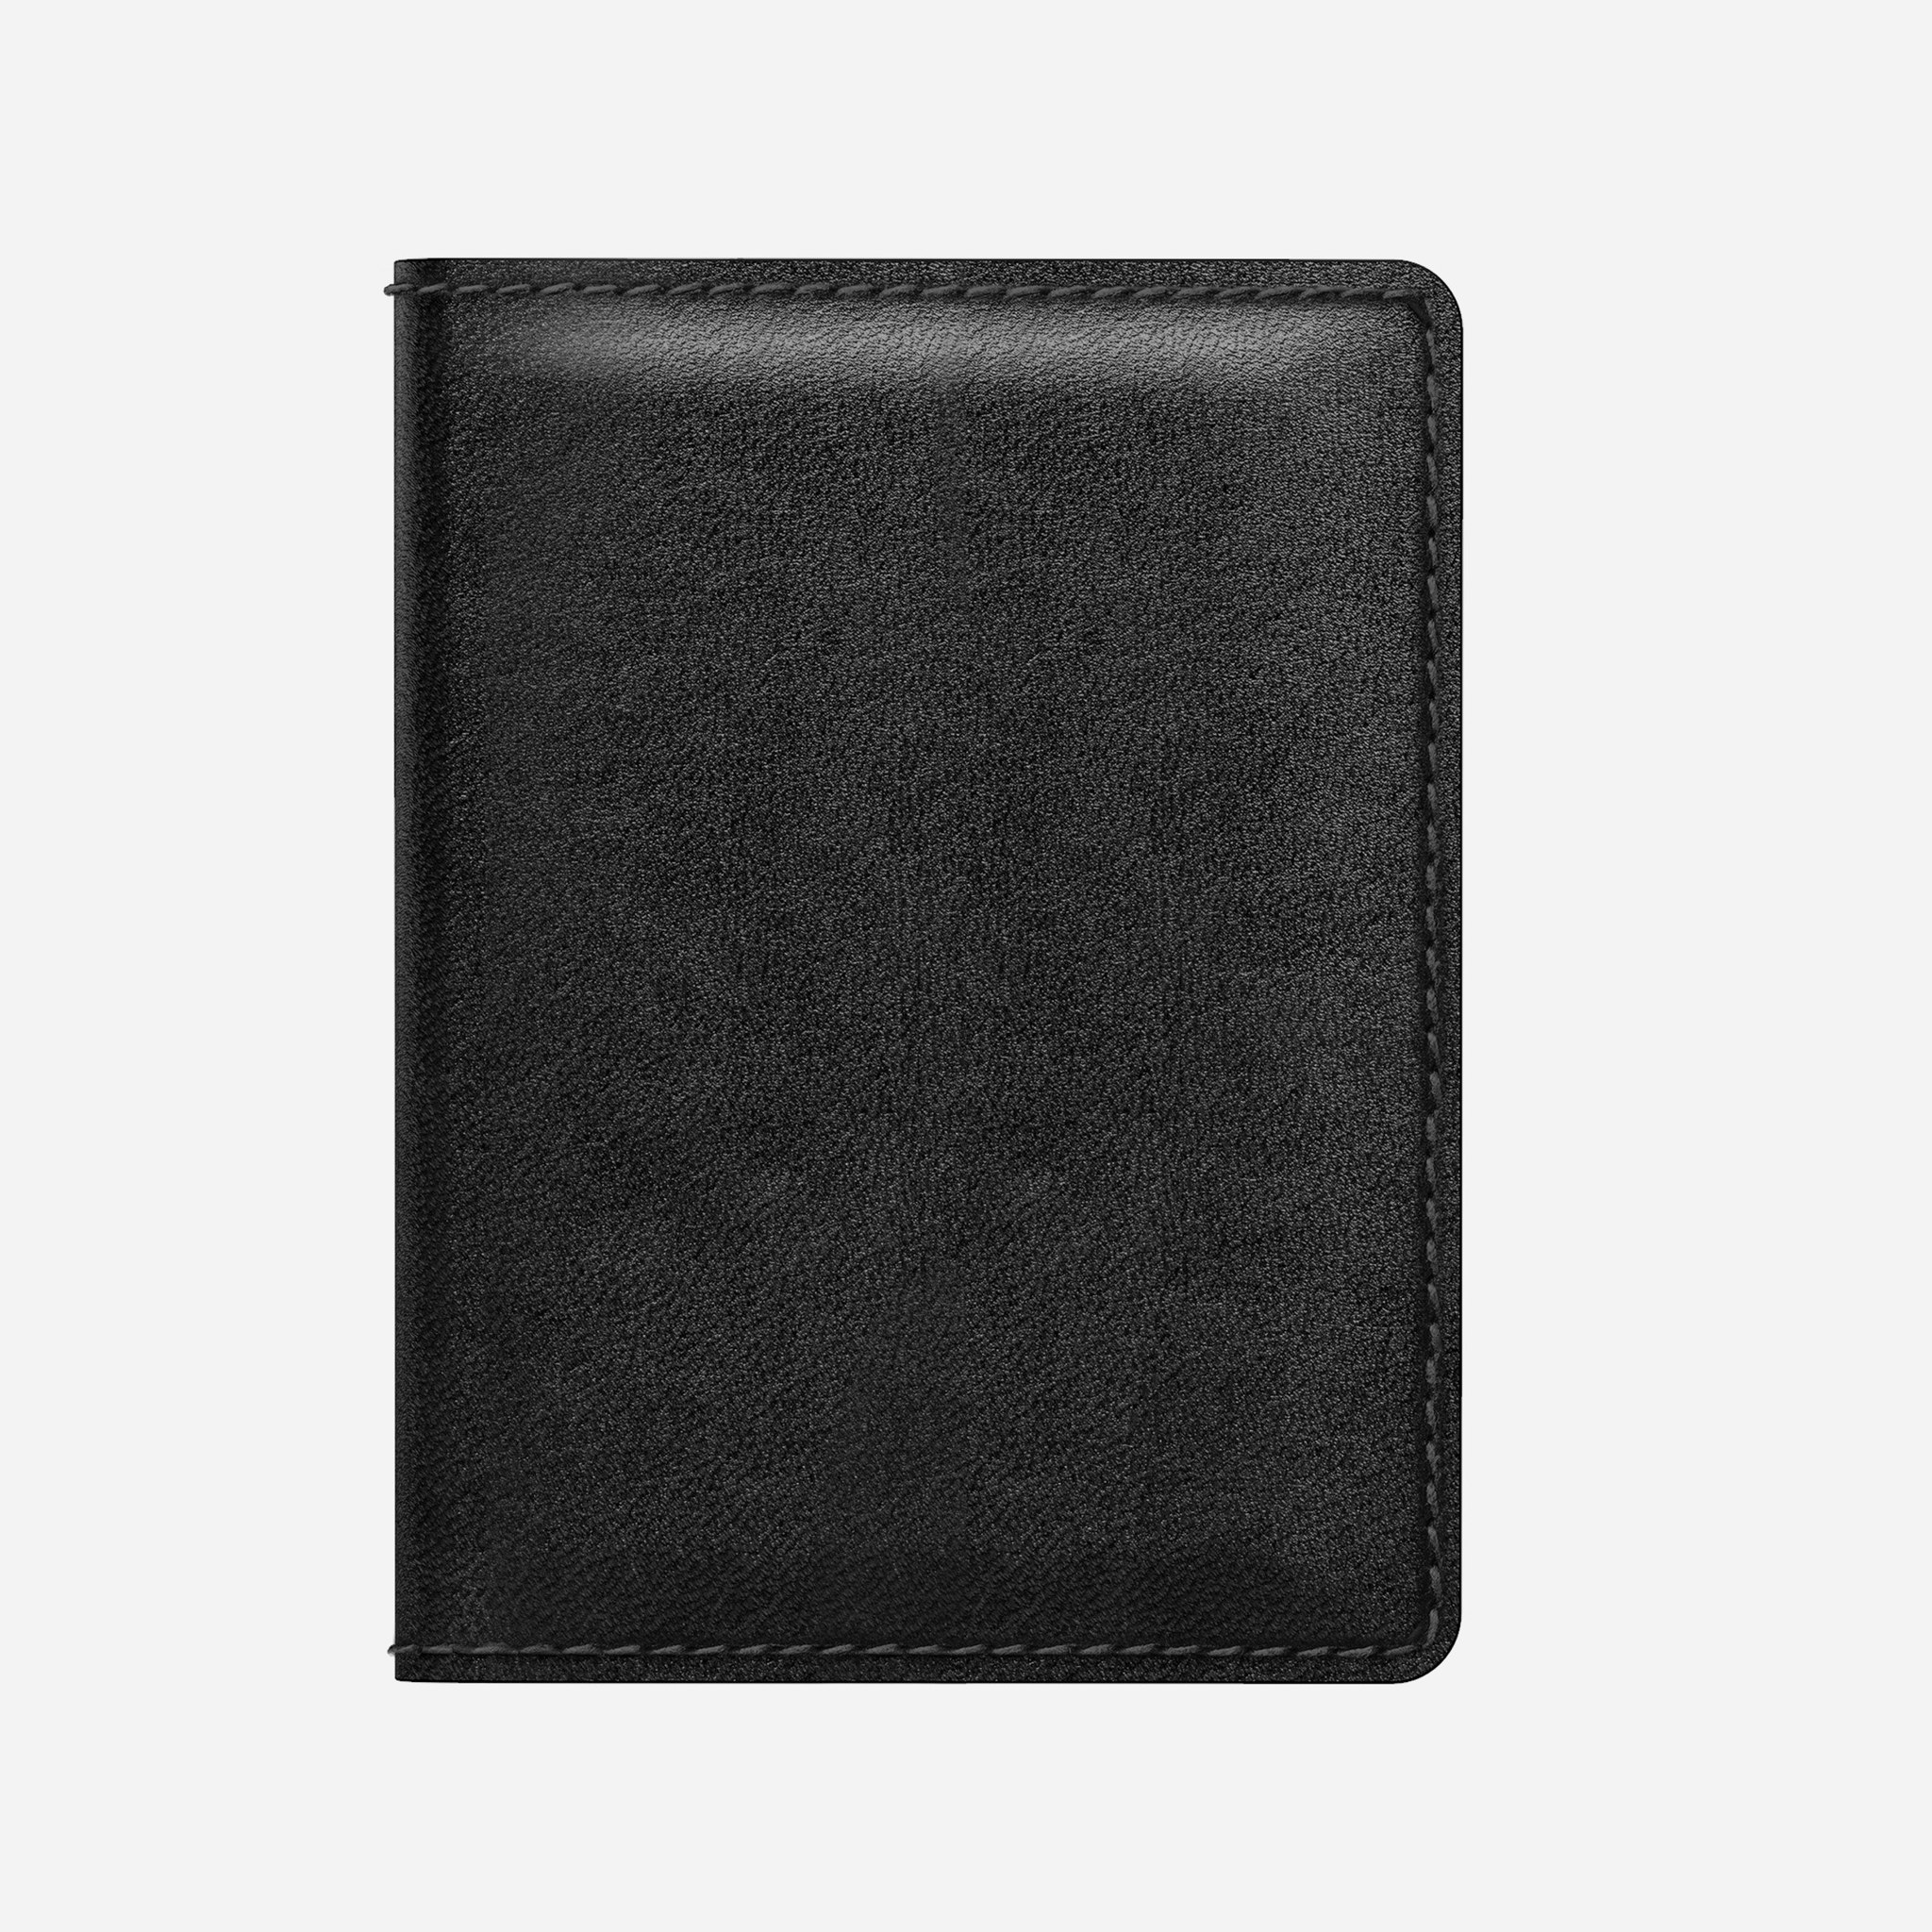 Horween Leather Wallets | NOMAD®